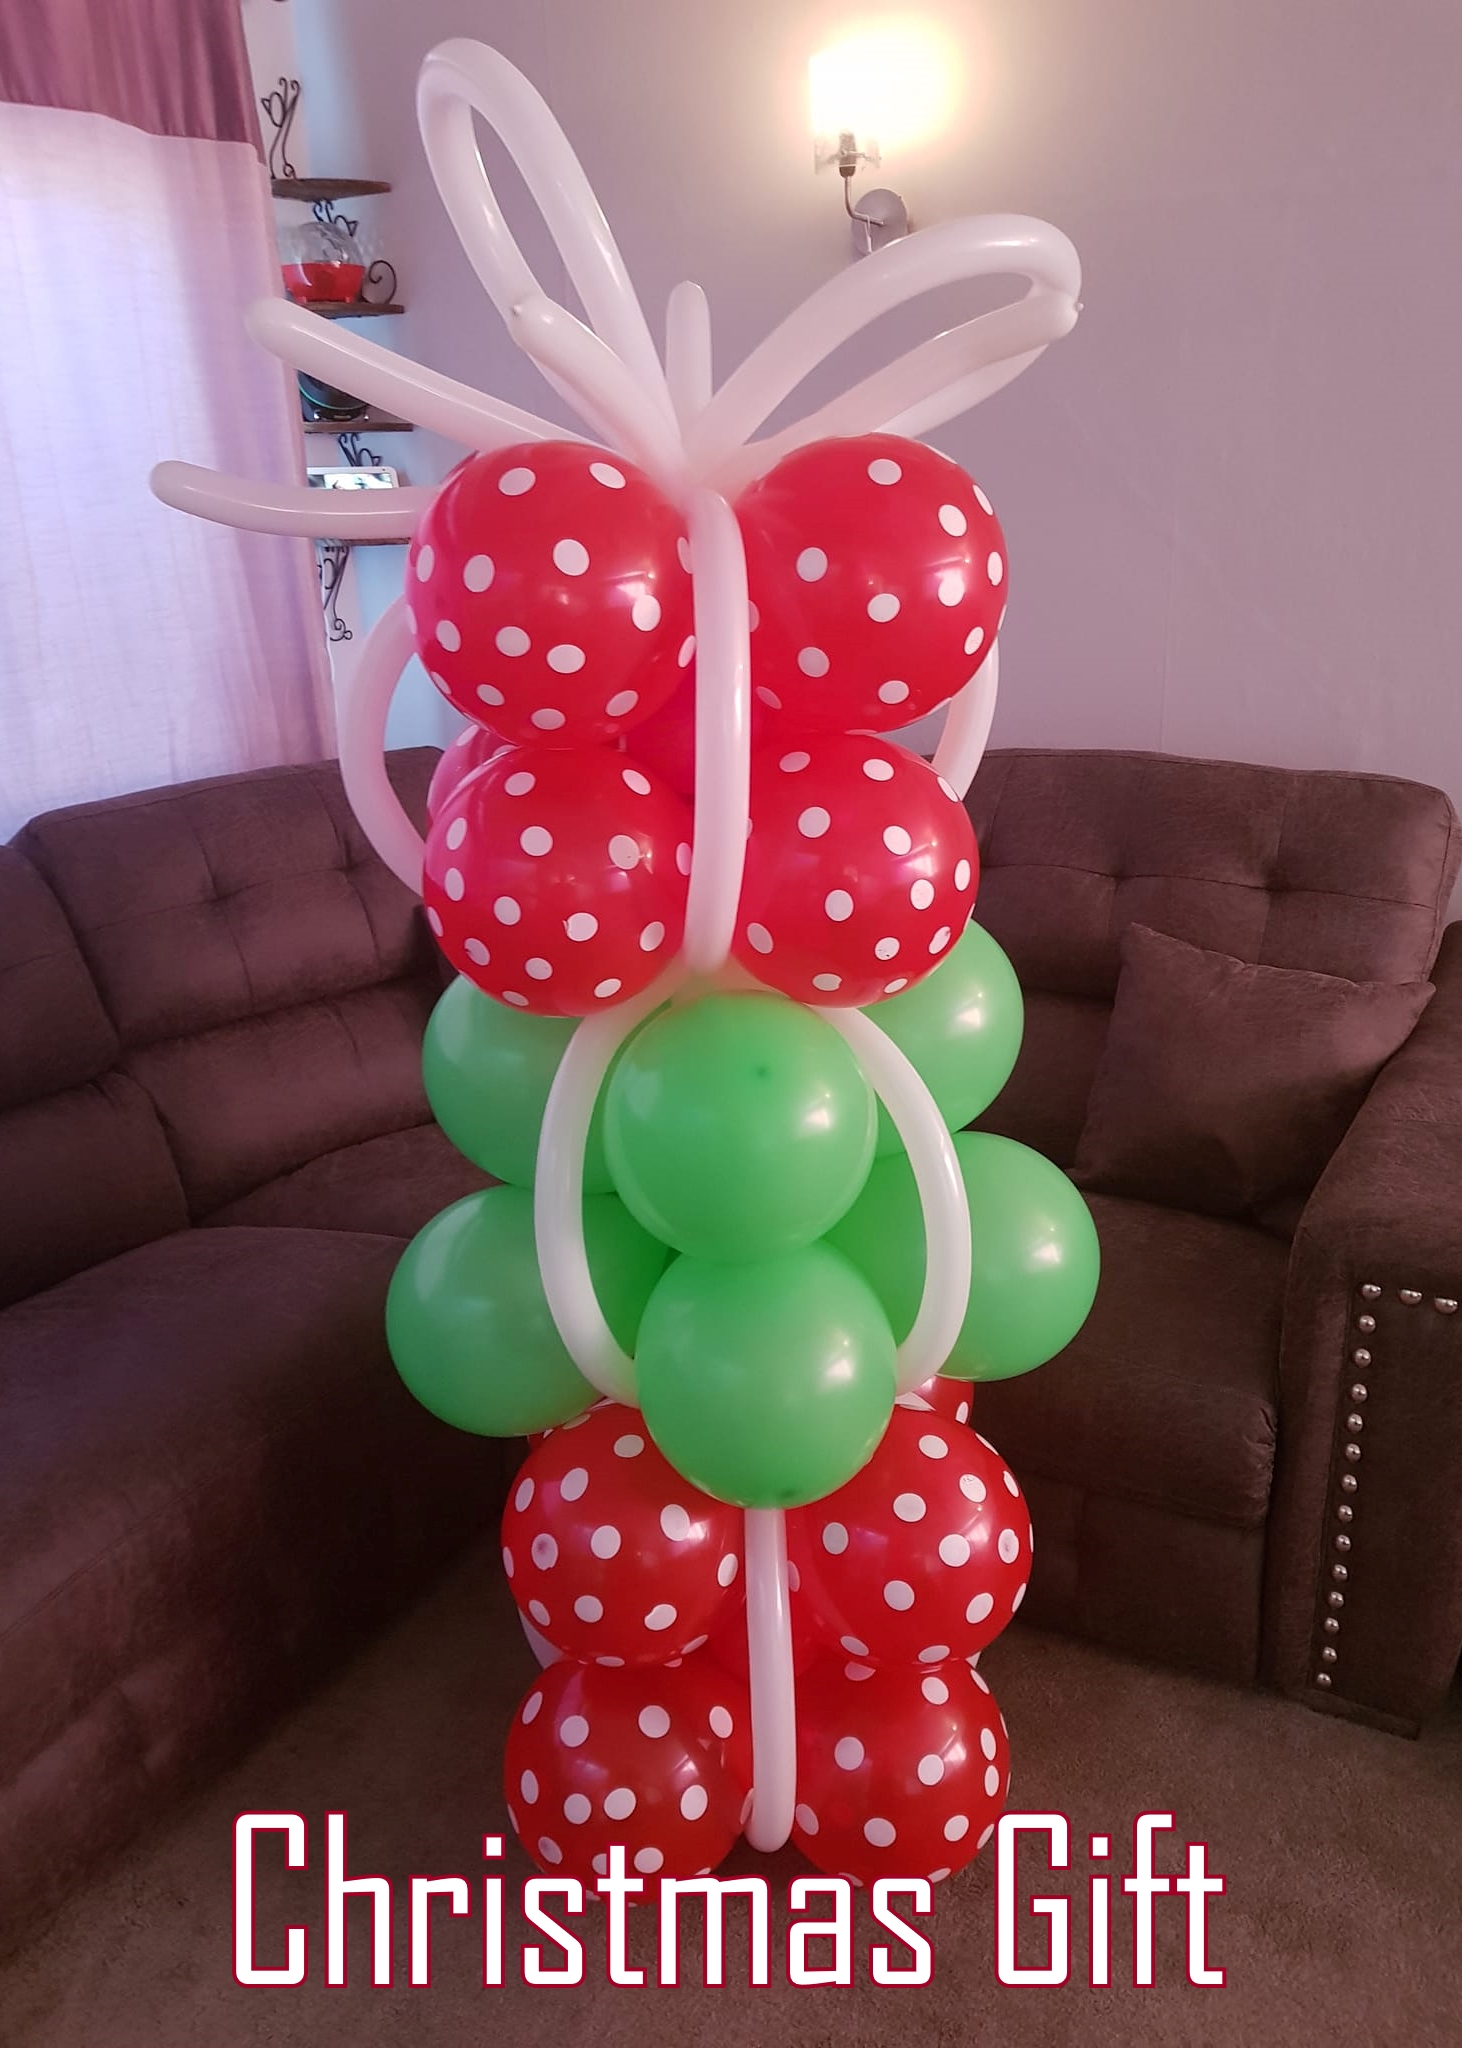 Christmas gift balloon sculpture by All in one place Teesside